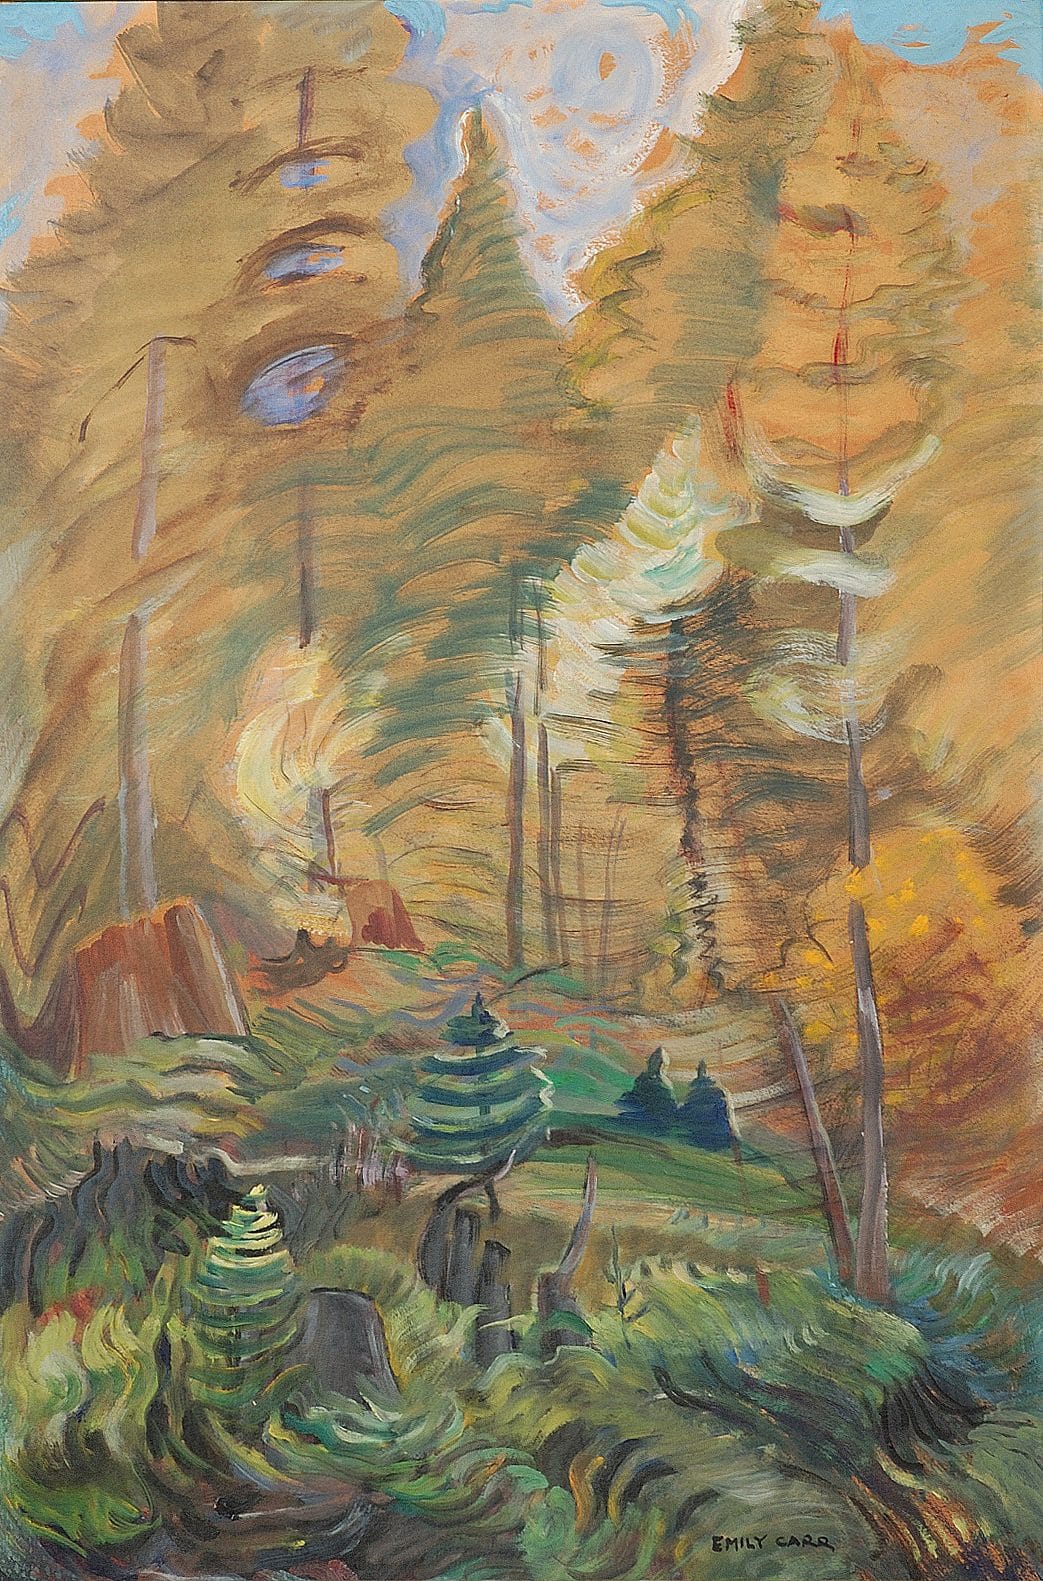 Emily Carr, Young and Old Trees, 1935, oil on paper, mounted on panel. Gift of Dr Max Stern in honour of Frances K. Smith, curator emeritus, 1983 (26-026)